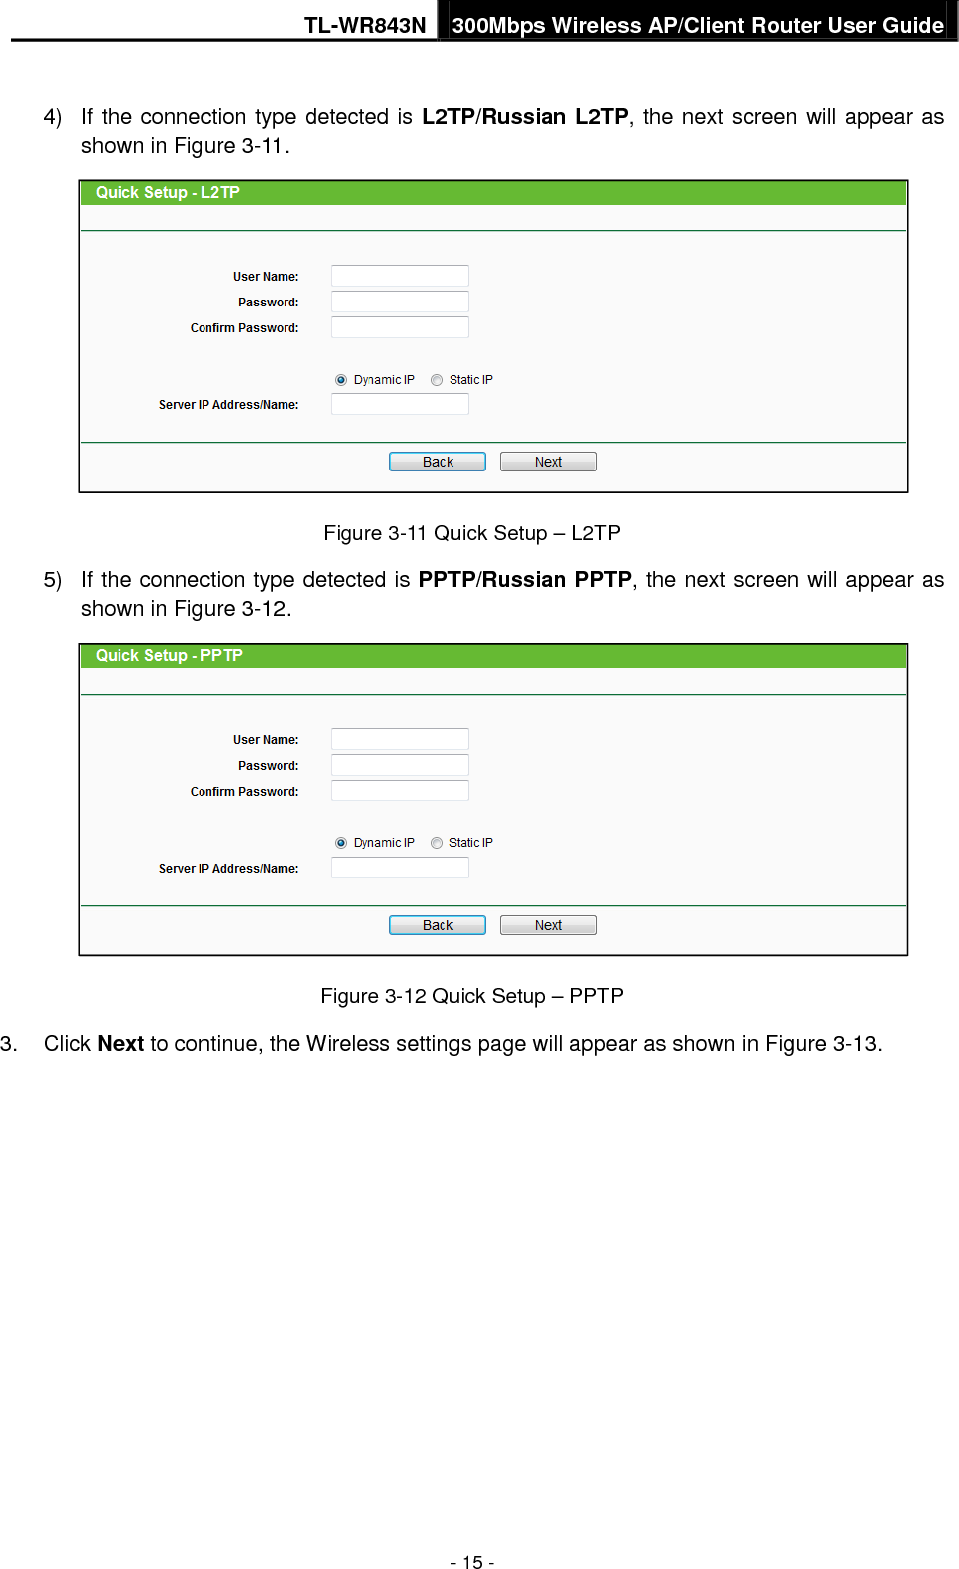 TL-WR843N 300Mbps Wireless AP/Client Router User Guide - 15 - 4) If the connection type detected is L2TP/Russian L2TP, the next screen will appear asshown in Figure 3-11.Figure 3-11 Quick Setup – L2TP 5) If the connection type detected is PPTP/Russian PPTP, the next screen will appear asshown in Figure 3-12.Figure 3-12 Quick Setup – PPTP 3. Click Next to continue, the Wireless settings page will appear as shown in Figure 3-13.